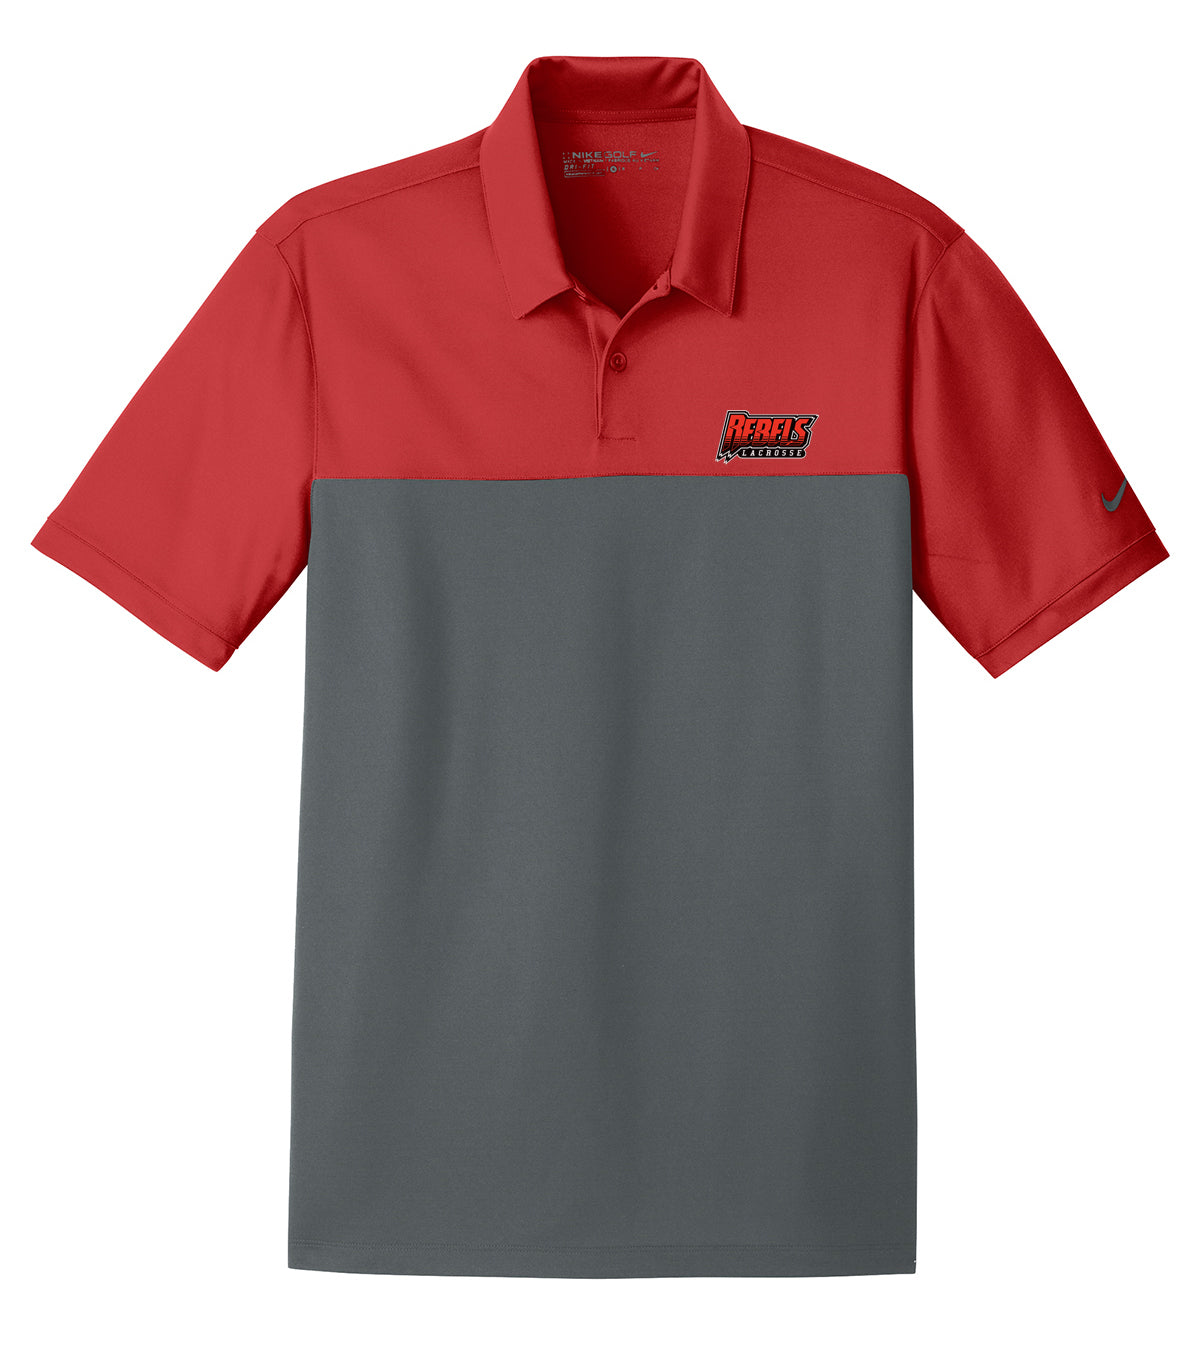 Rebels Lacrosse Red/Anthracite Nike Dri-FIT Colorblock Polo